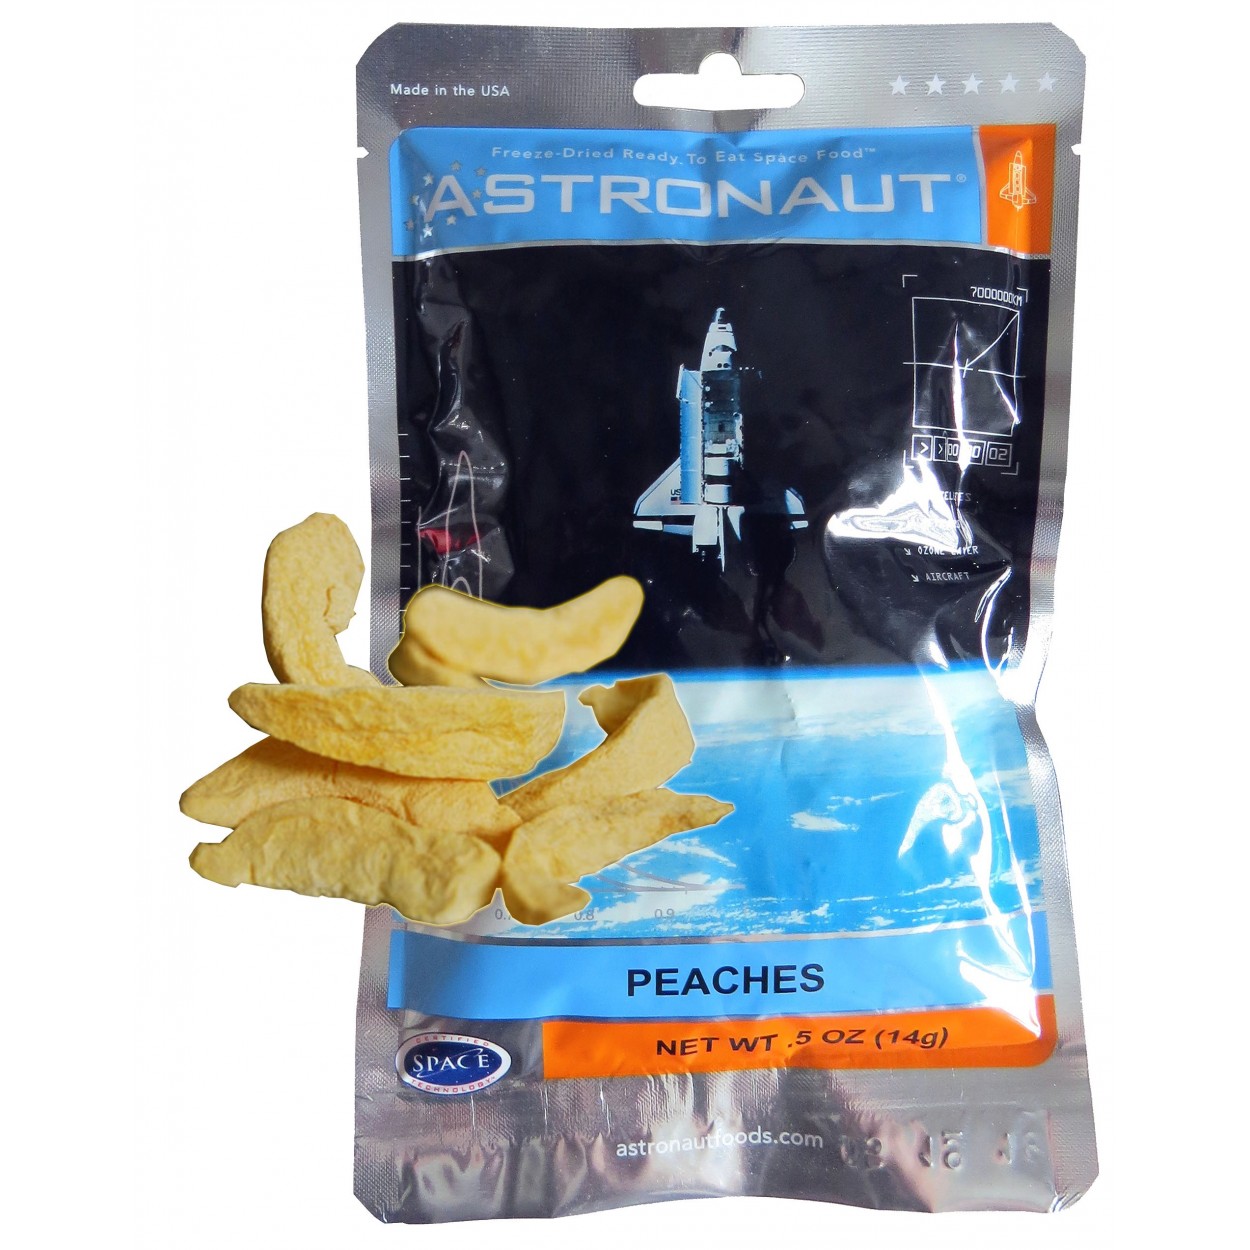 Astronaut food: you’ll eat that too